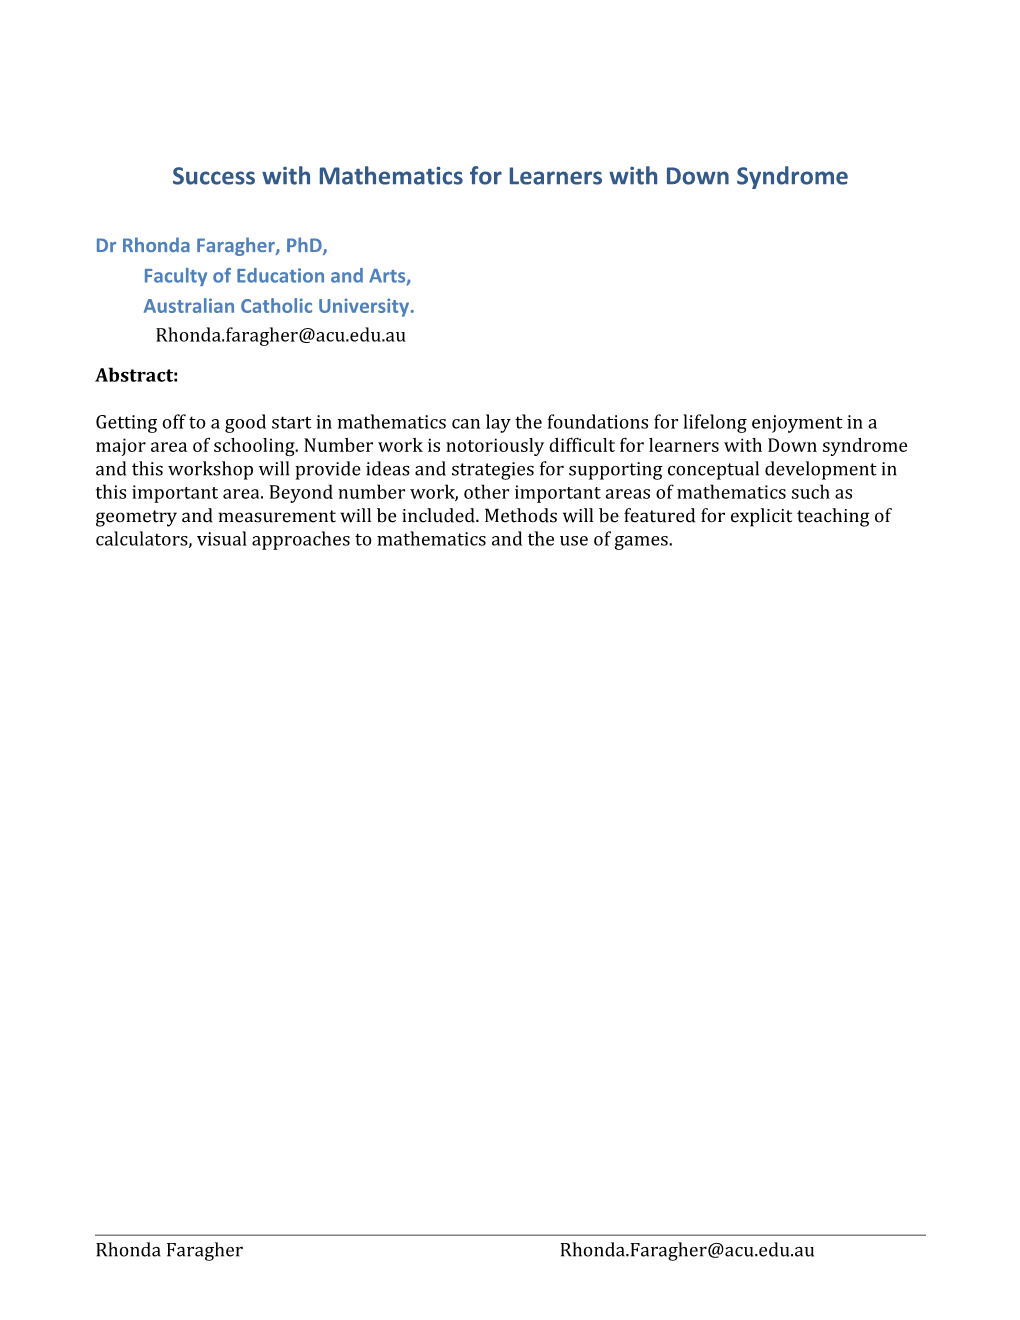 Success with Mathematics for Learners with Down Syndrome